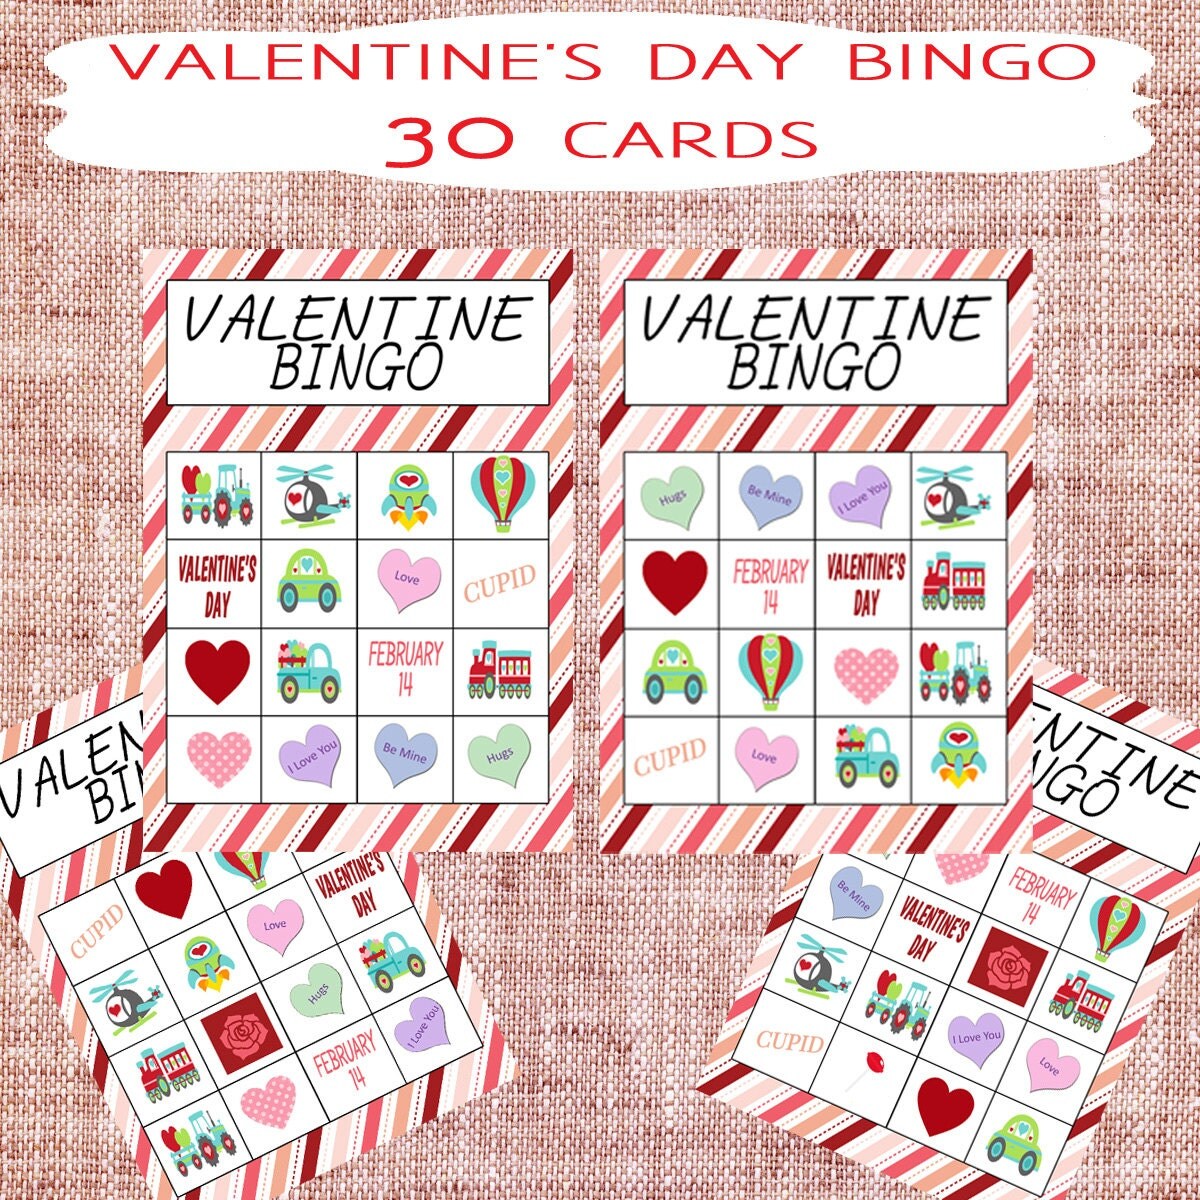 Download Printable Valentine's Day Bingo & Memory Game by GraceHopeDesigns